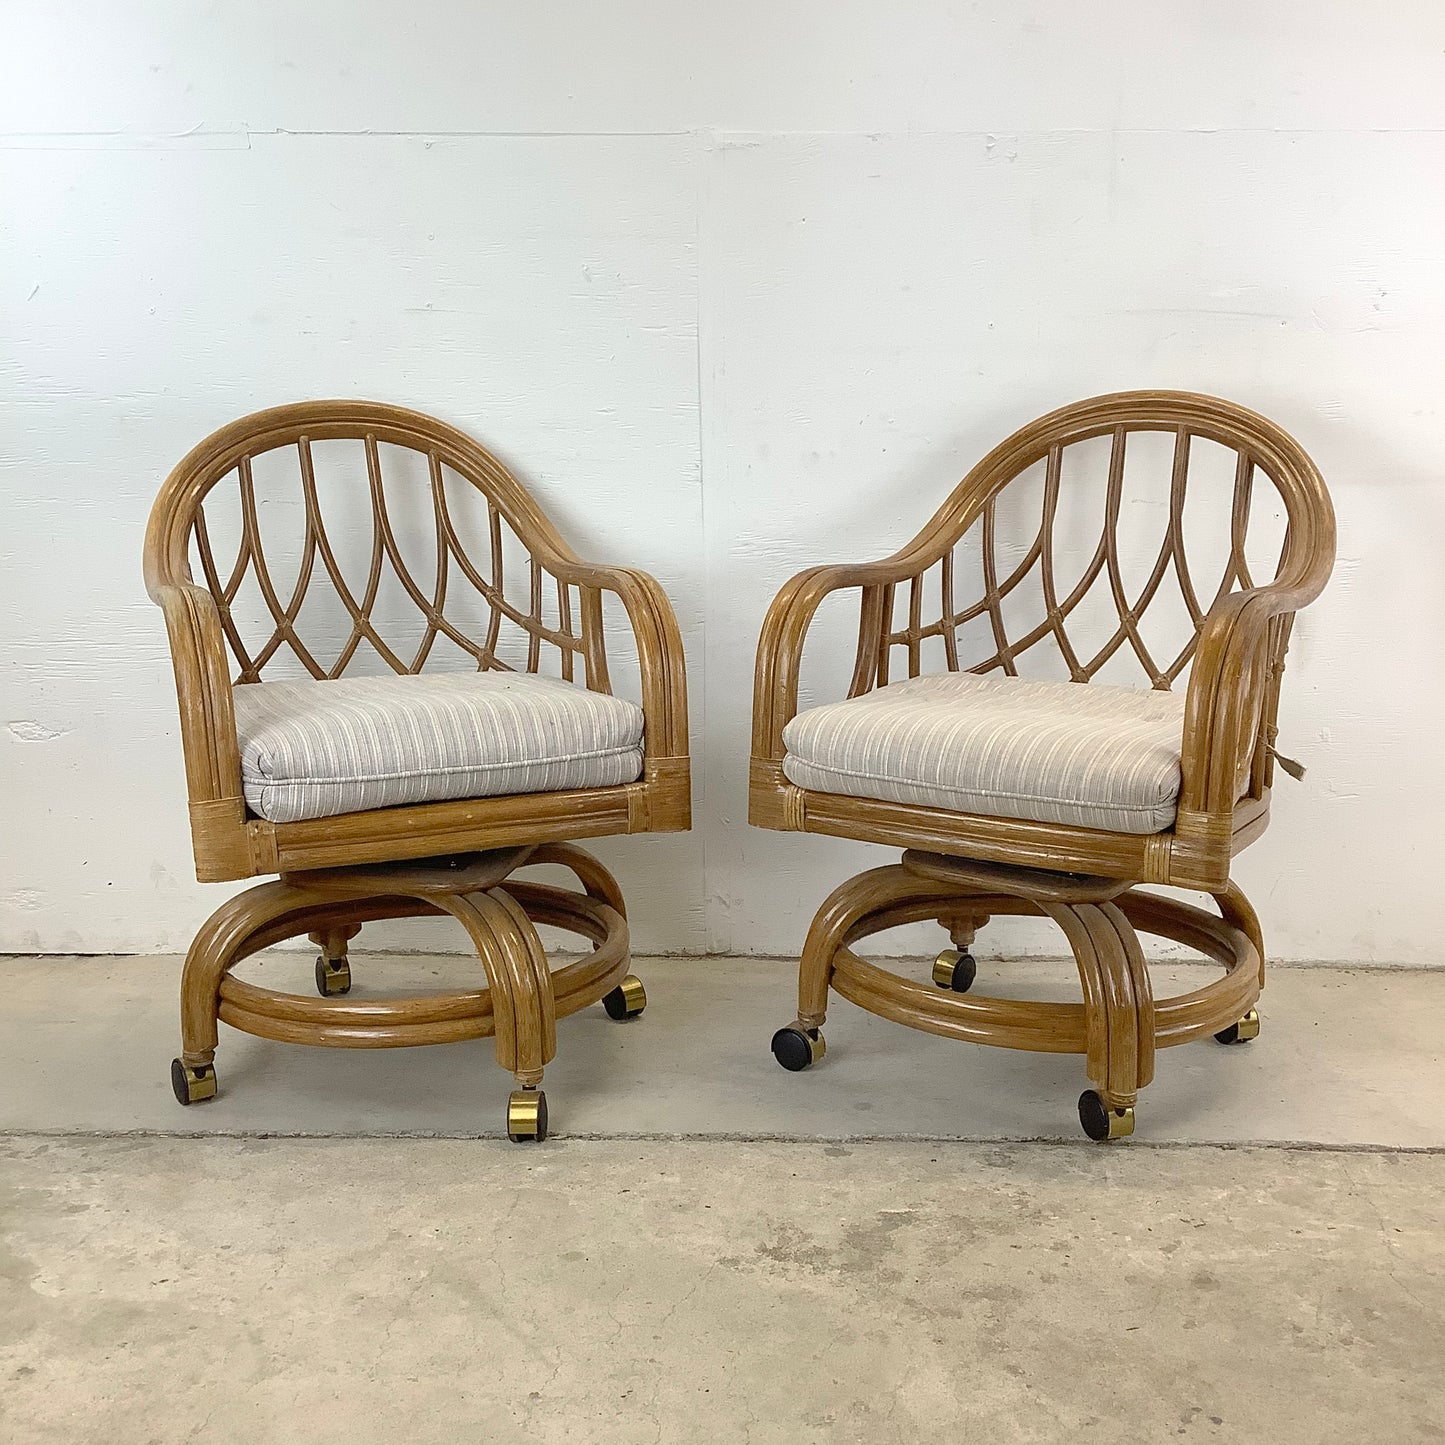 Four Vintage Bamboo Dining Chairs by Lane Venture